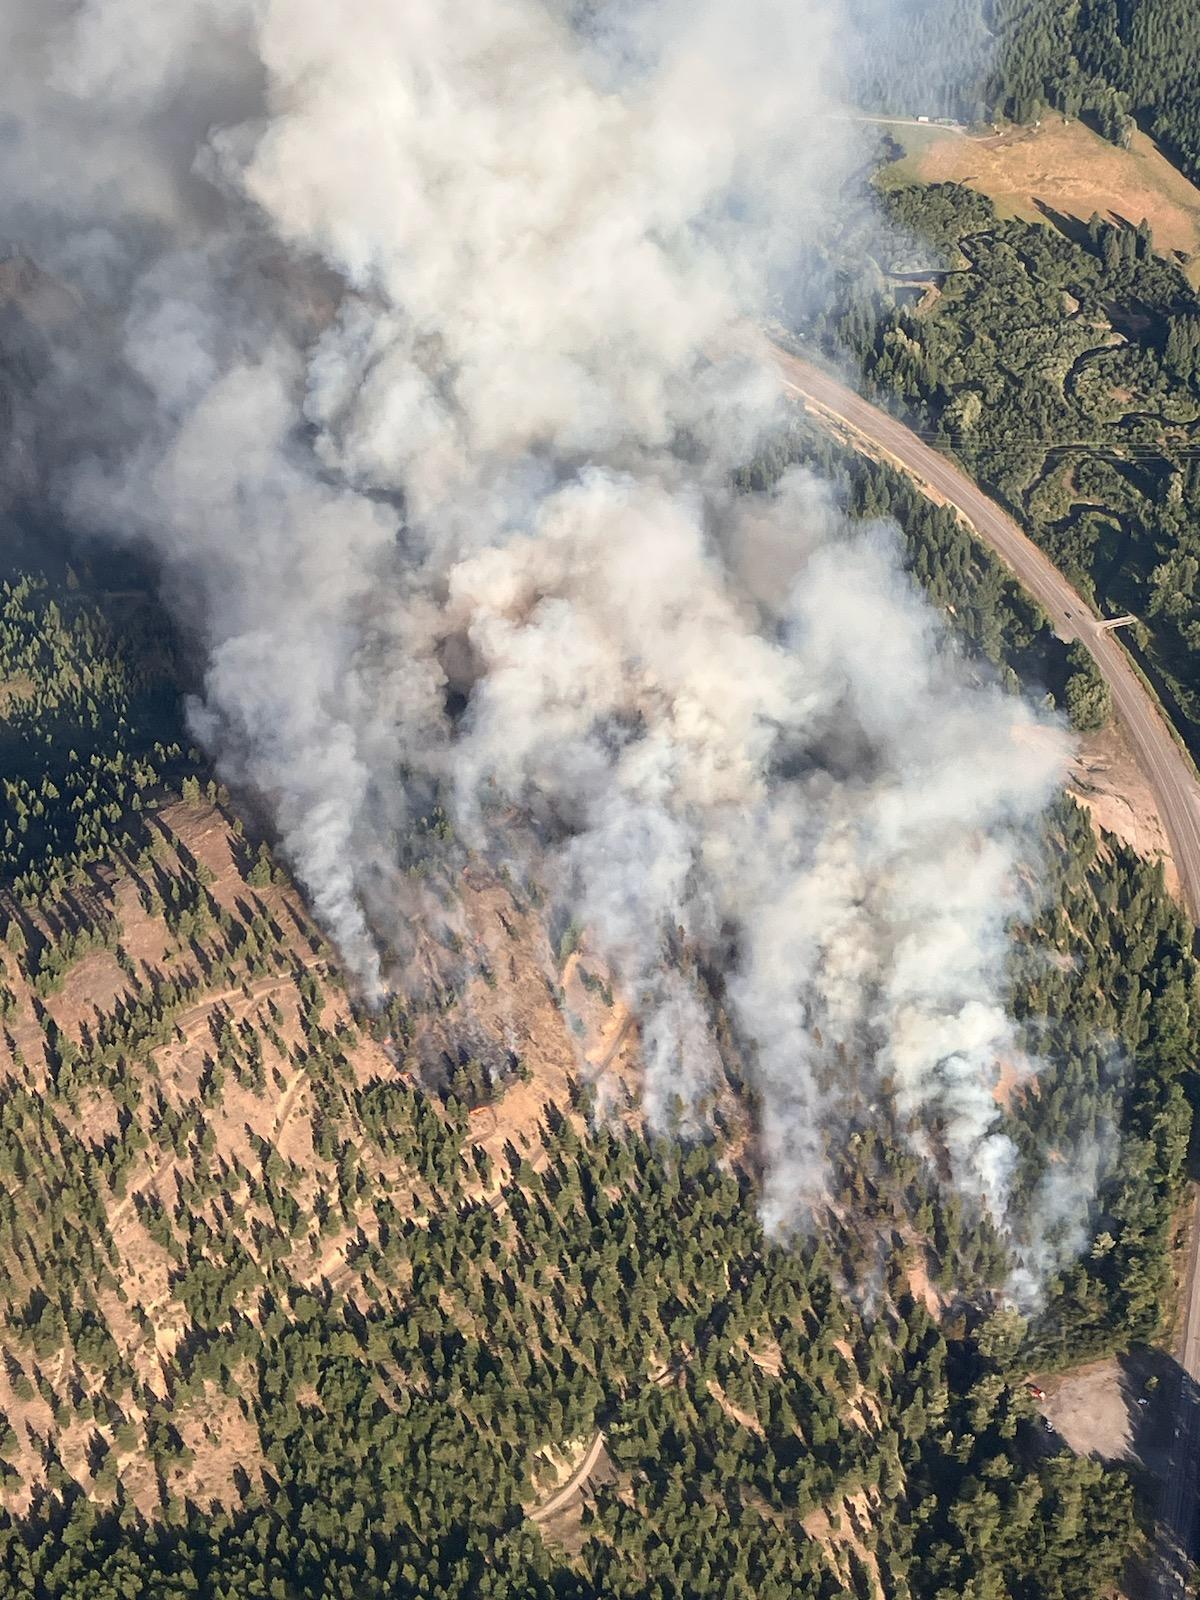 Aerial View of Gravel Pit Fire on Wednesday, August 2 - Photo Credit Kellie Kulseth